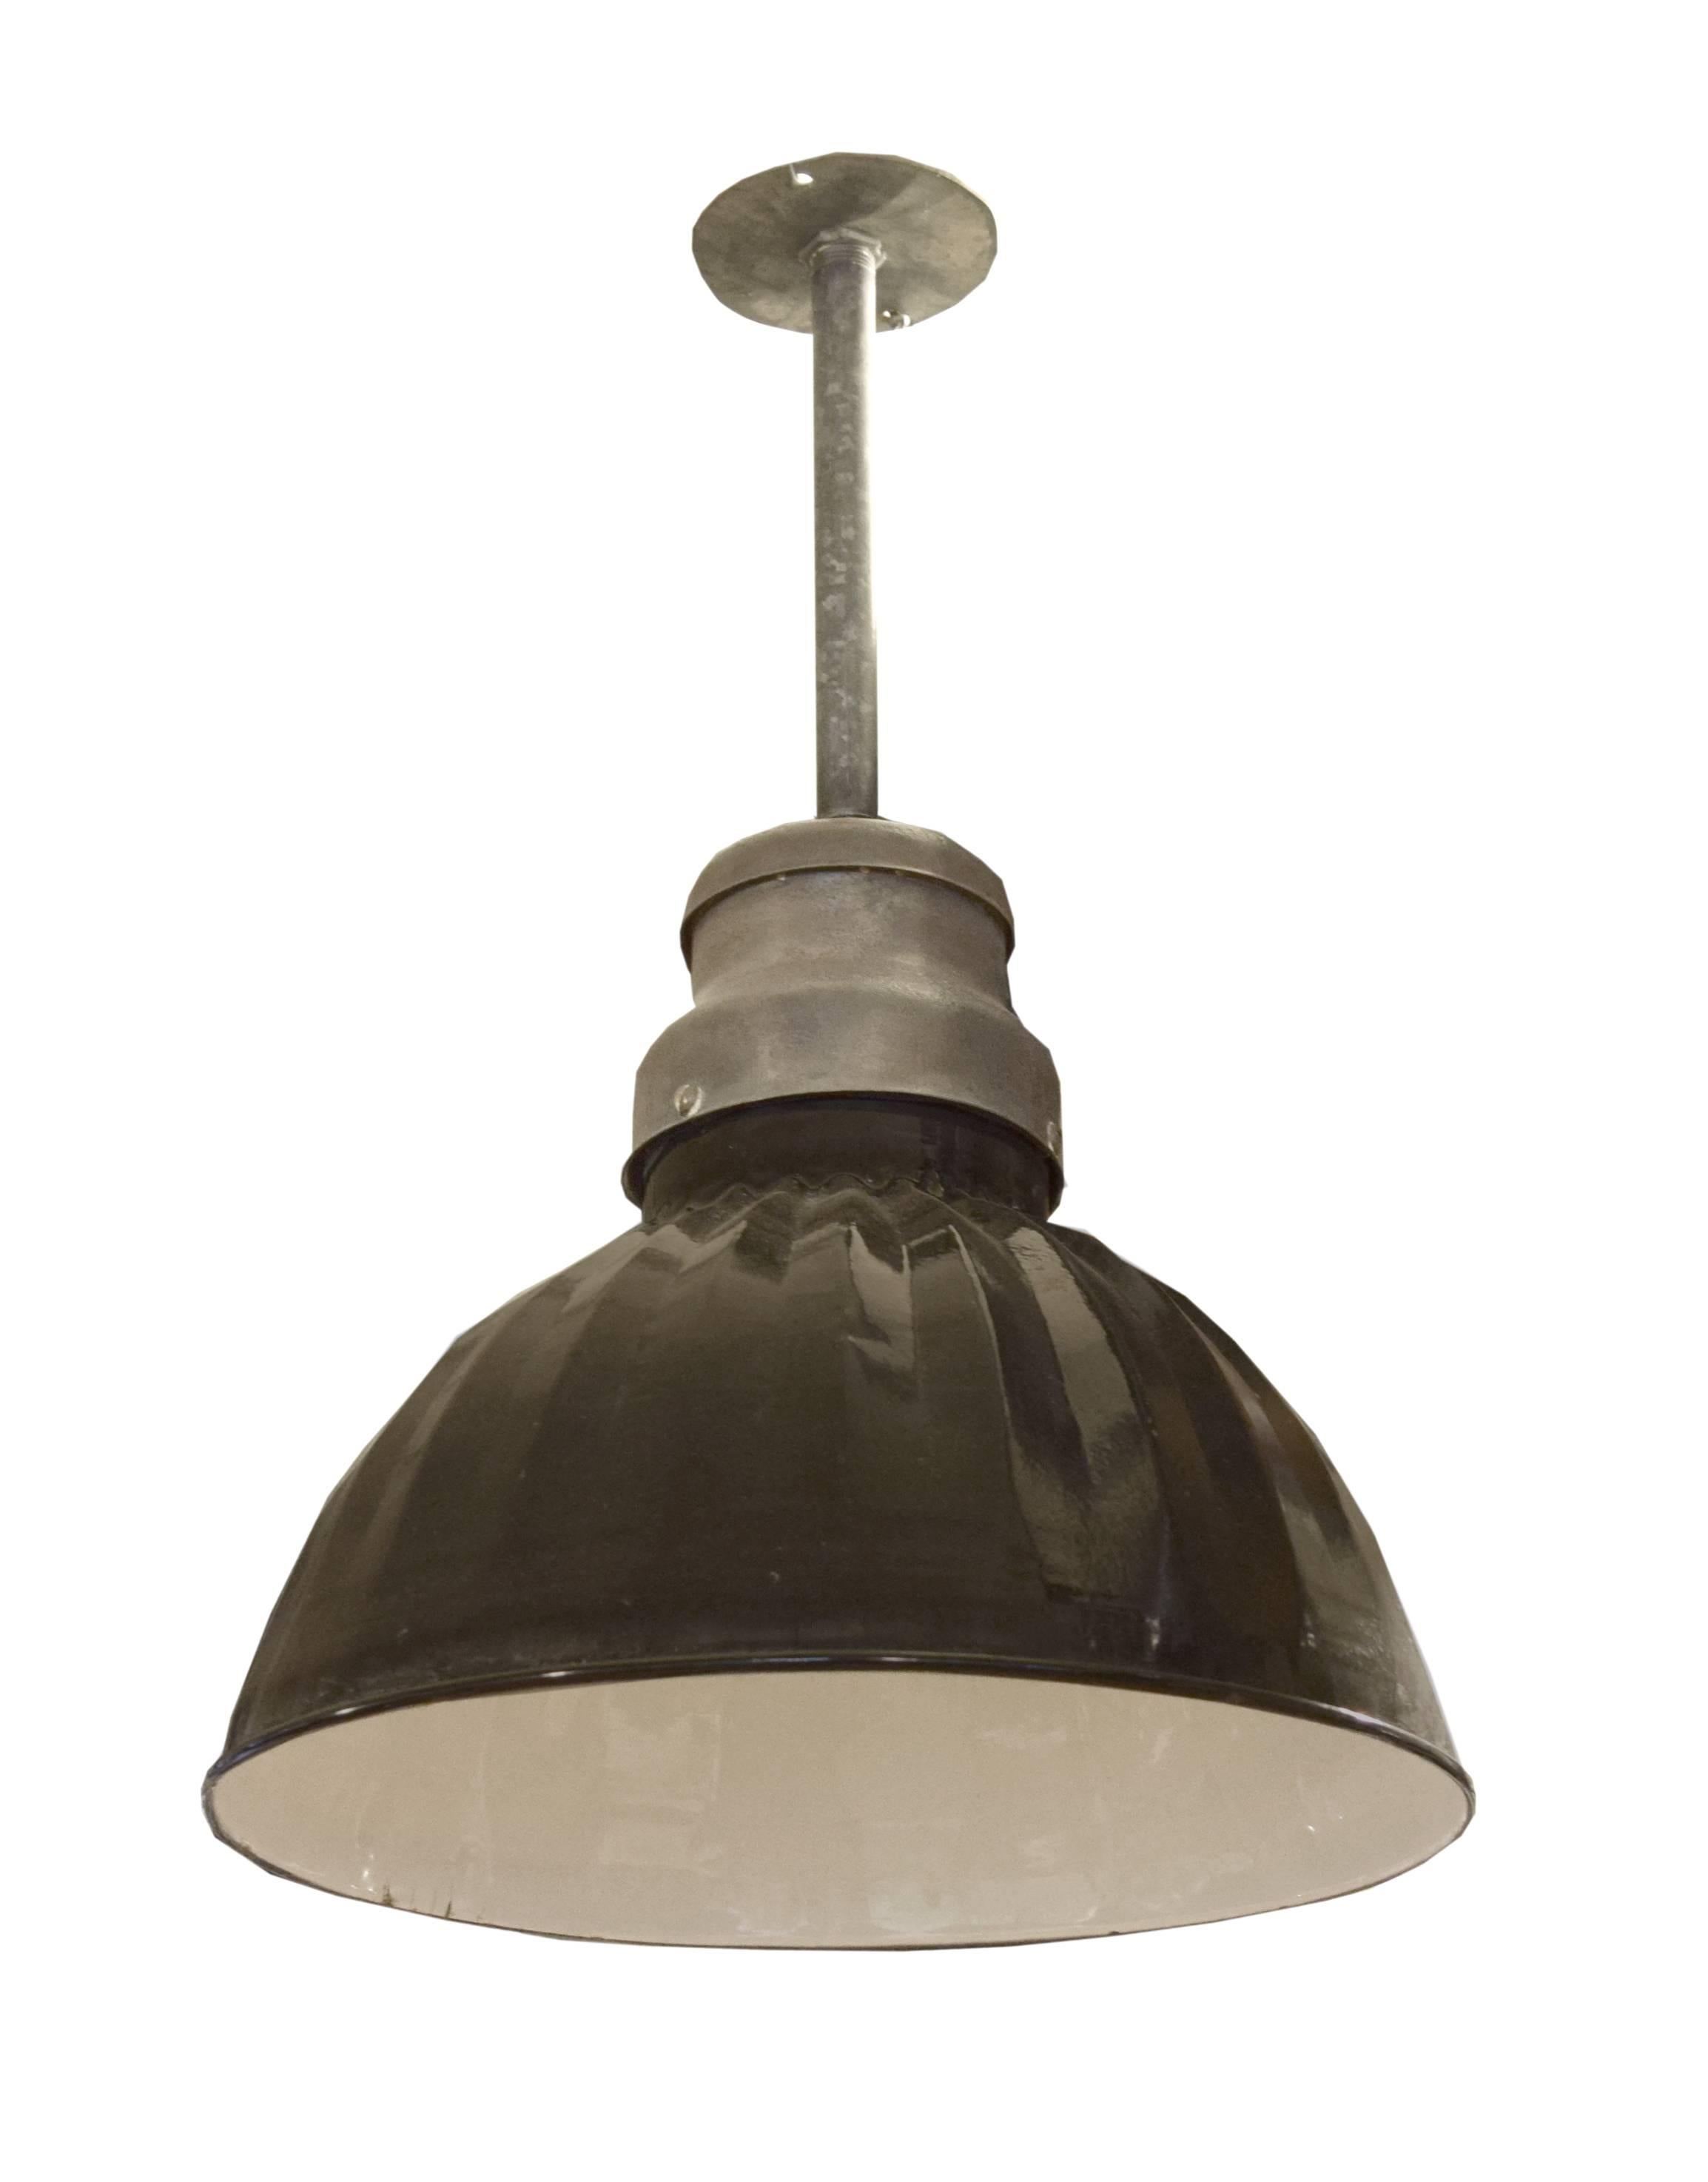 American Industrial pendant with a rare black enameled steel shade. In original condition.

Needs to be re-wired.